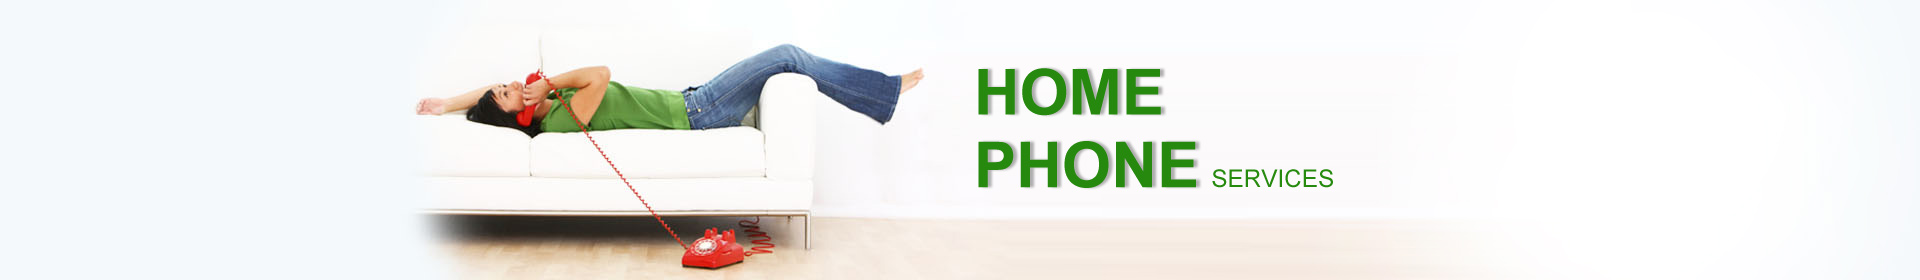 home-phone-page-banner